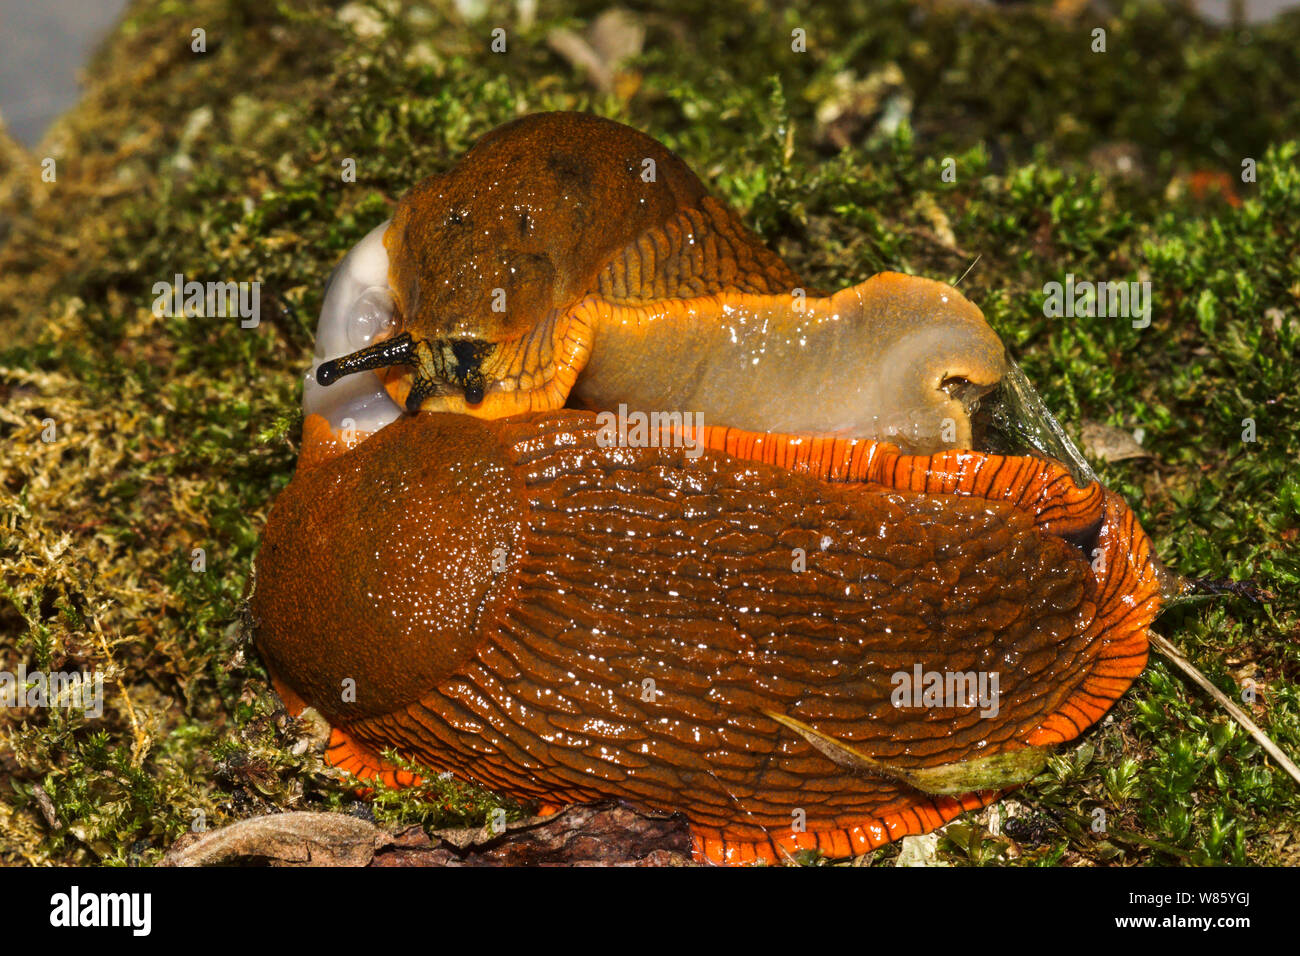 The Red Slug Arion rufus {ater}.A large robust slug common in my part of southwest France.Two adults mating. Stock Photo